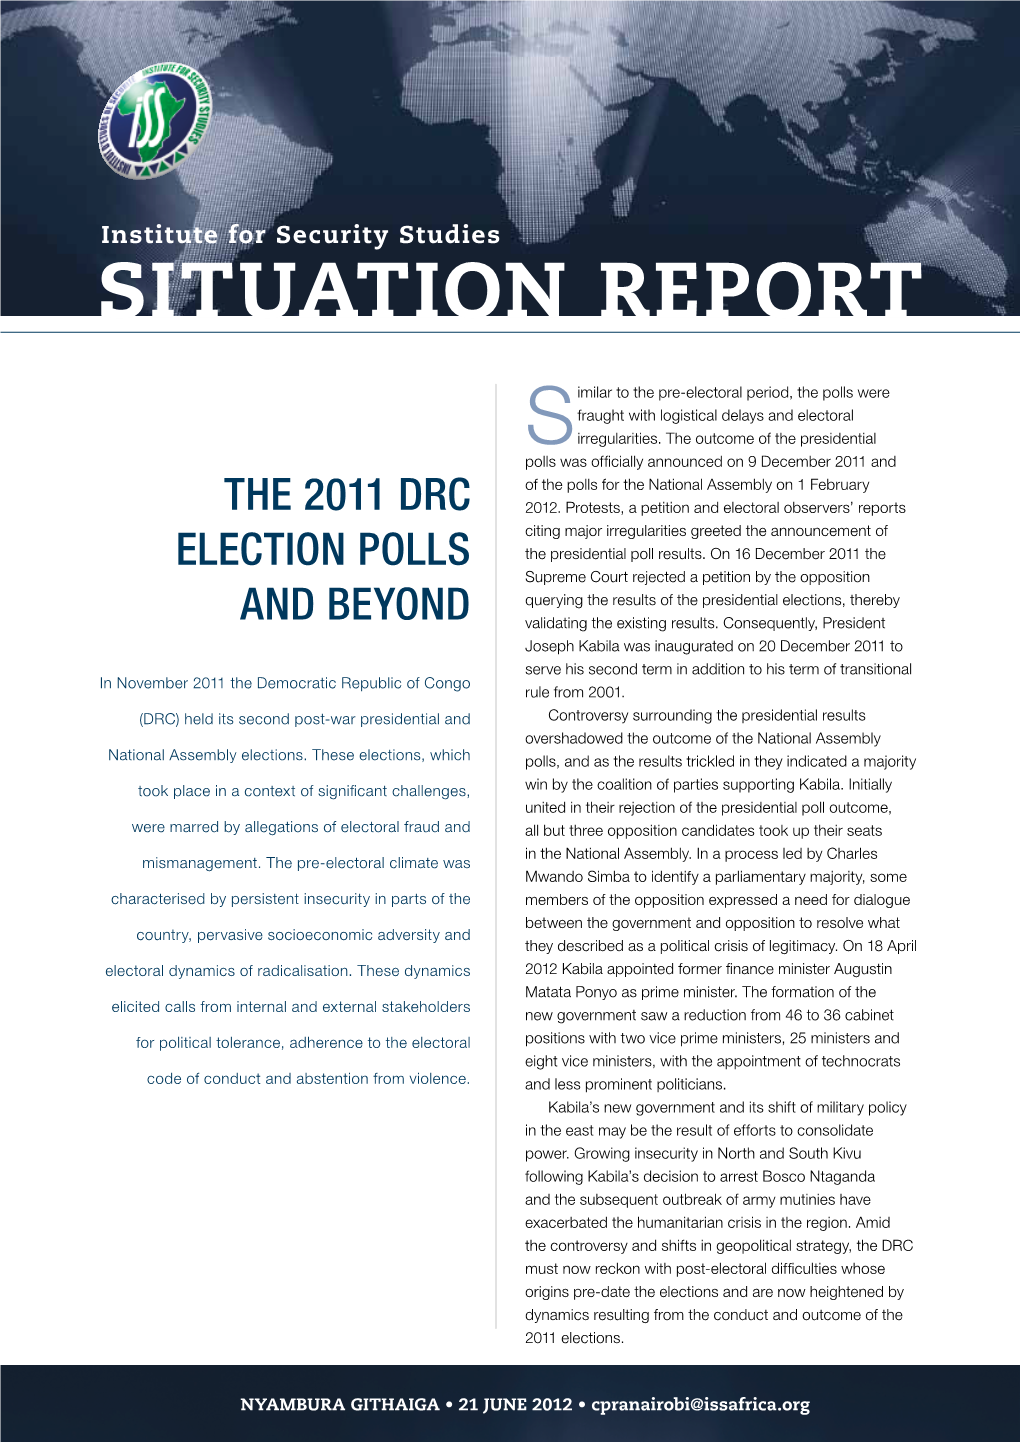 The 2011 DRC Election Polls and Beyond